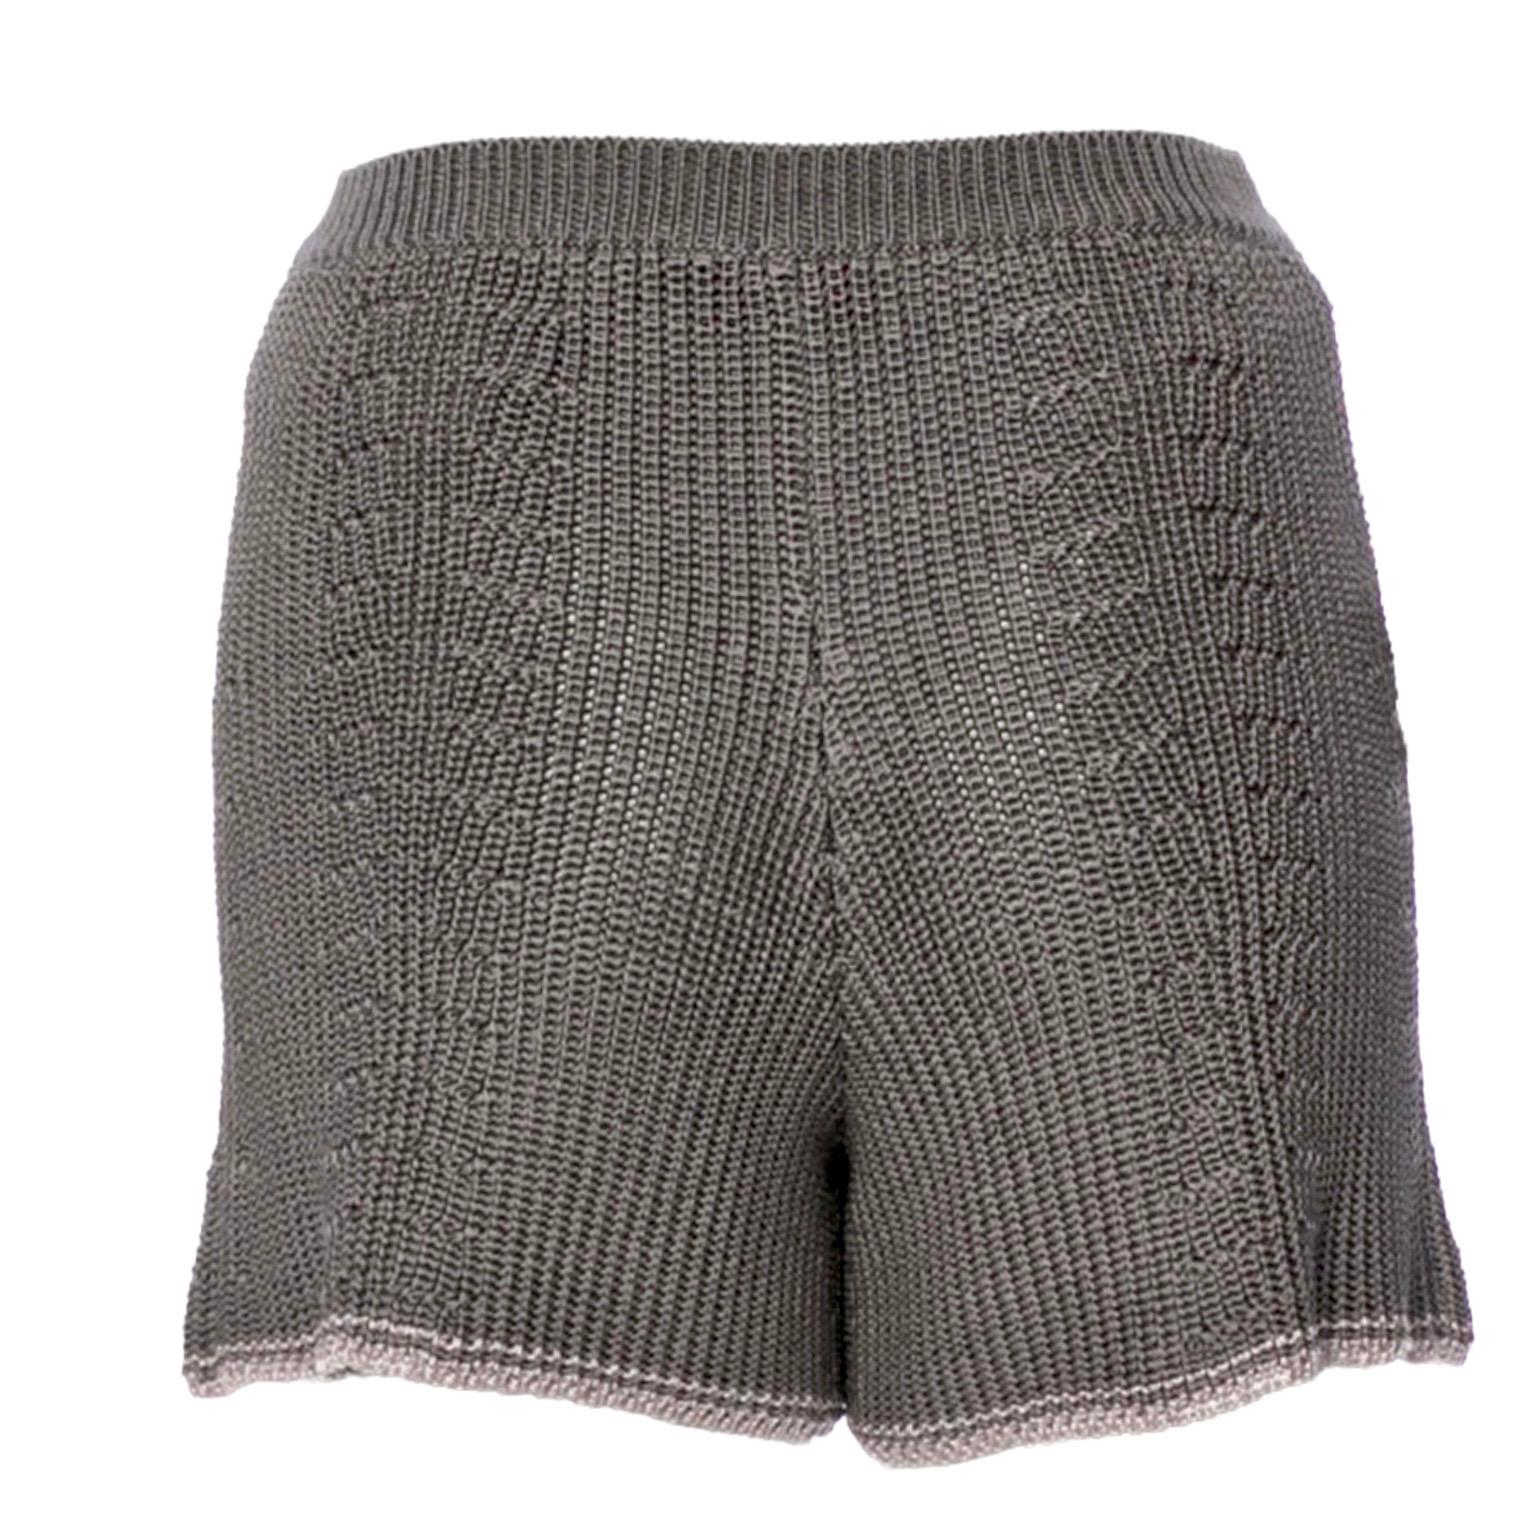 Missoni's multicolored sheer-knitshorts with a gold Lurex fleck for poolside style. A perfect add-on for a lazy day at the pool, beach or at home.

Missoni signature crochet knit
Beautiful grey colors
Simply slips on
    Dry Cleaning Only
    Made